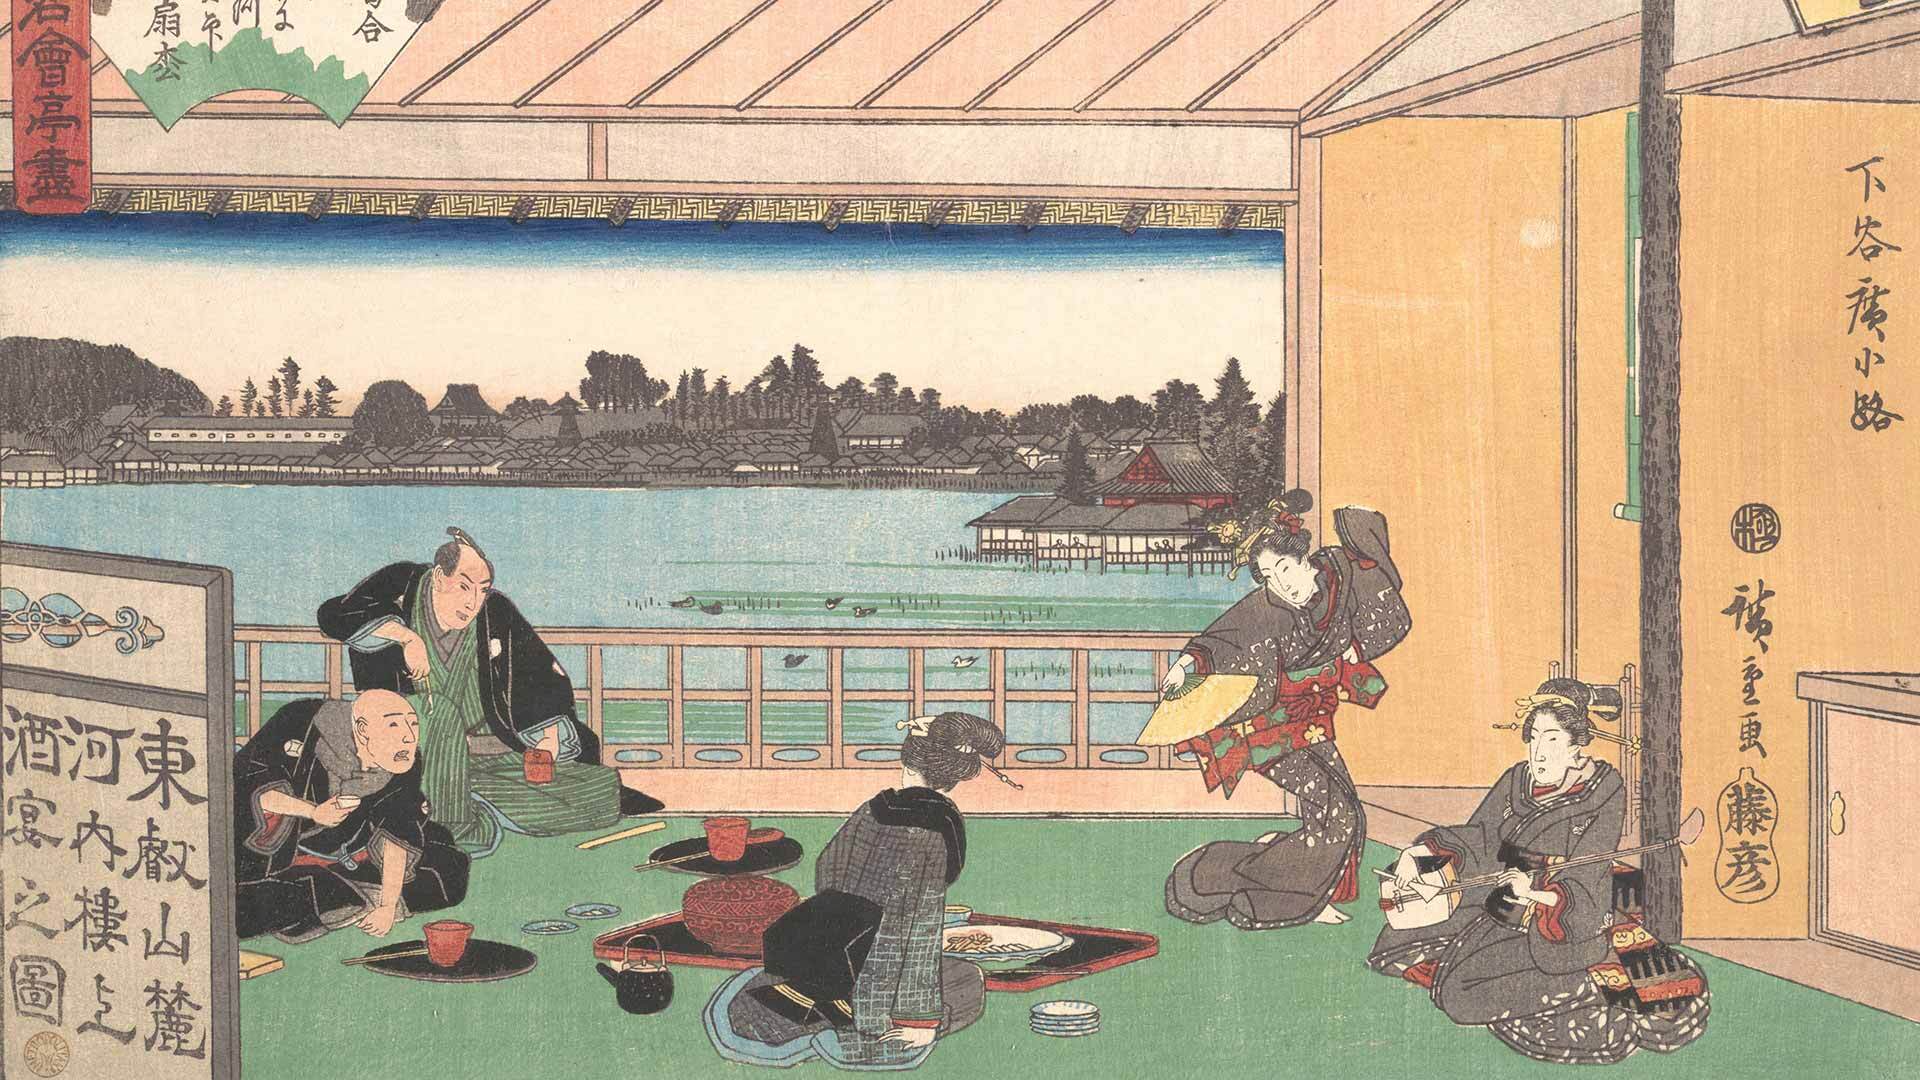 A painting of a teahouse